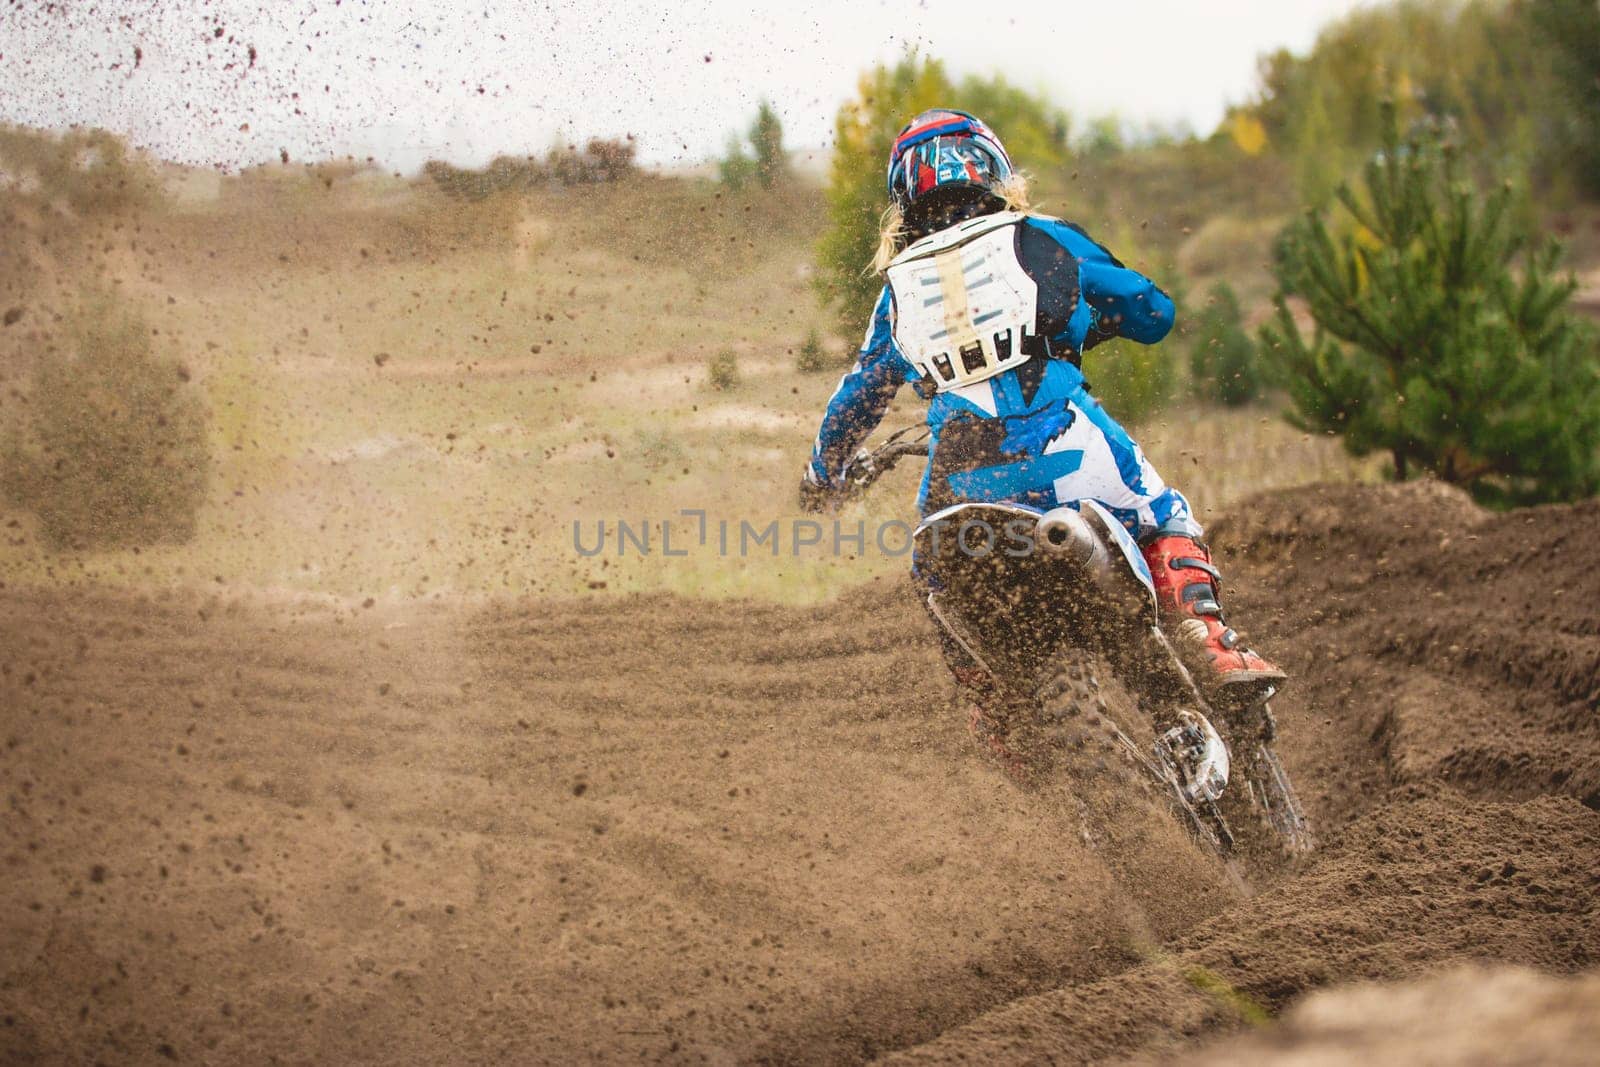 Moto cross - MX girl biker at race in Russia - a sharp turn and the spray of dirt, rear view by Studia72